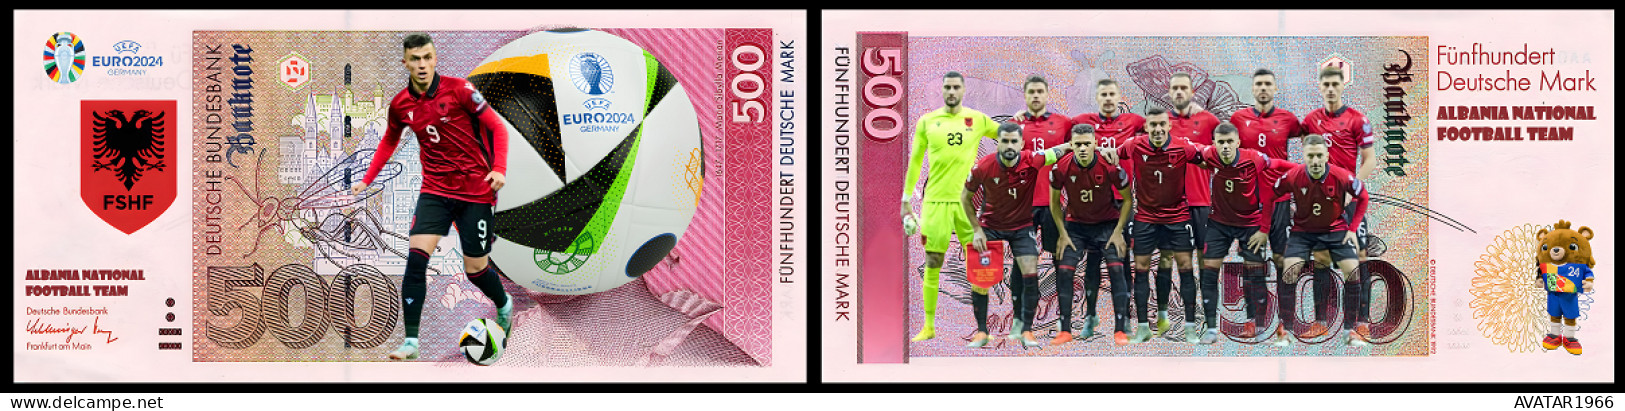 UEFA European Football Championship 2024 qualified country Albania 8 pieces Germany fantasy paper money